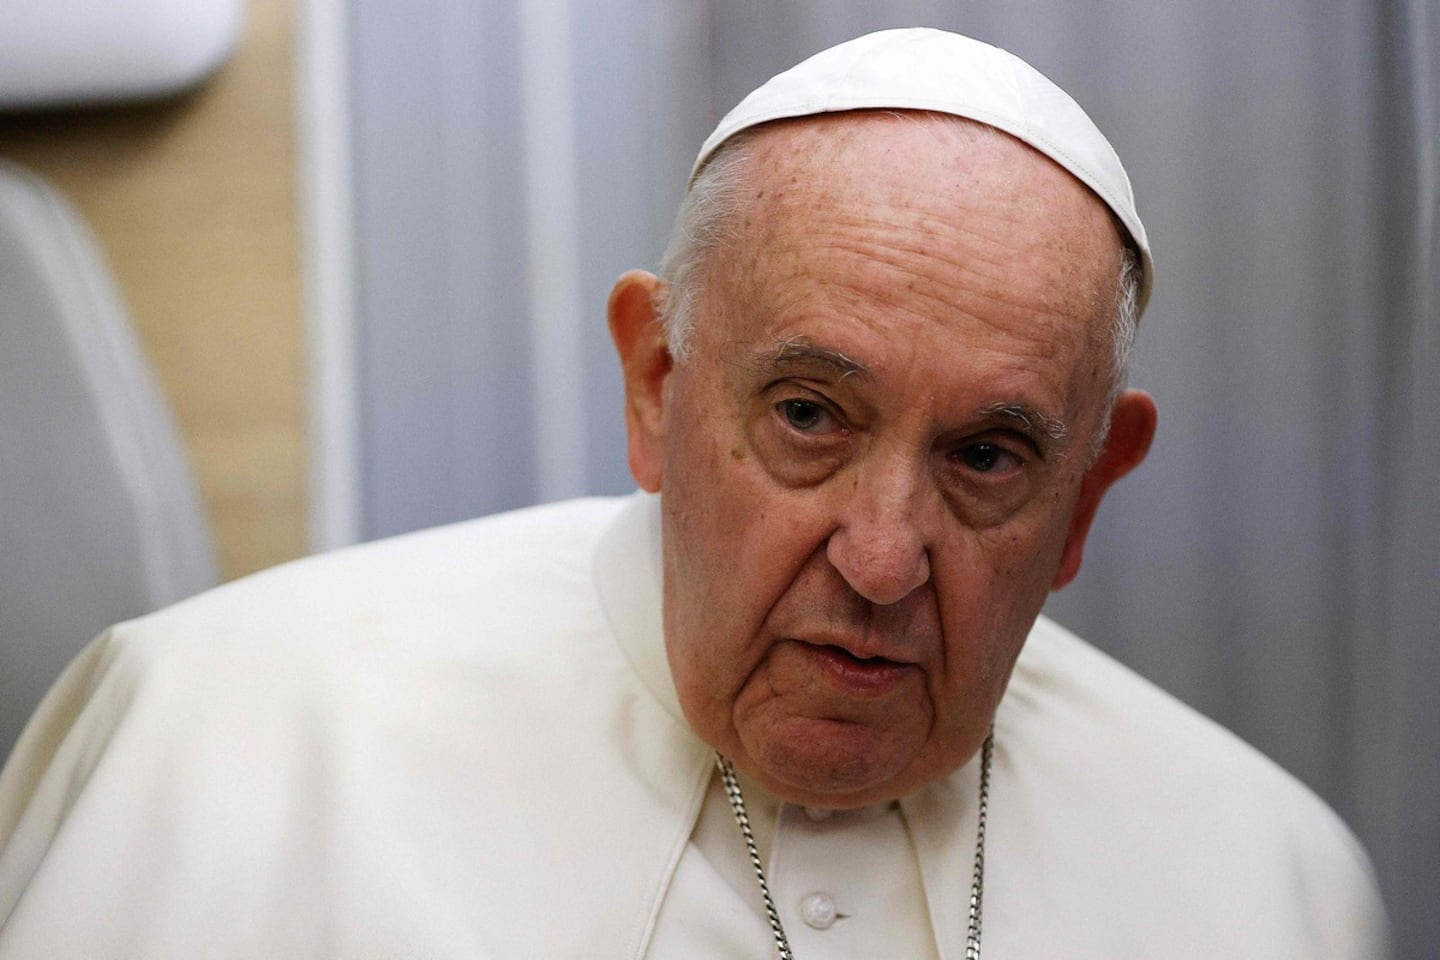 The Pope, diminished, admits that he will no longer be able to “travel at the same pace”